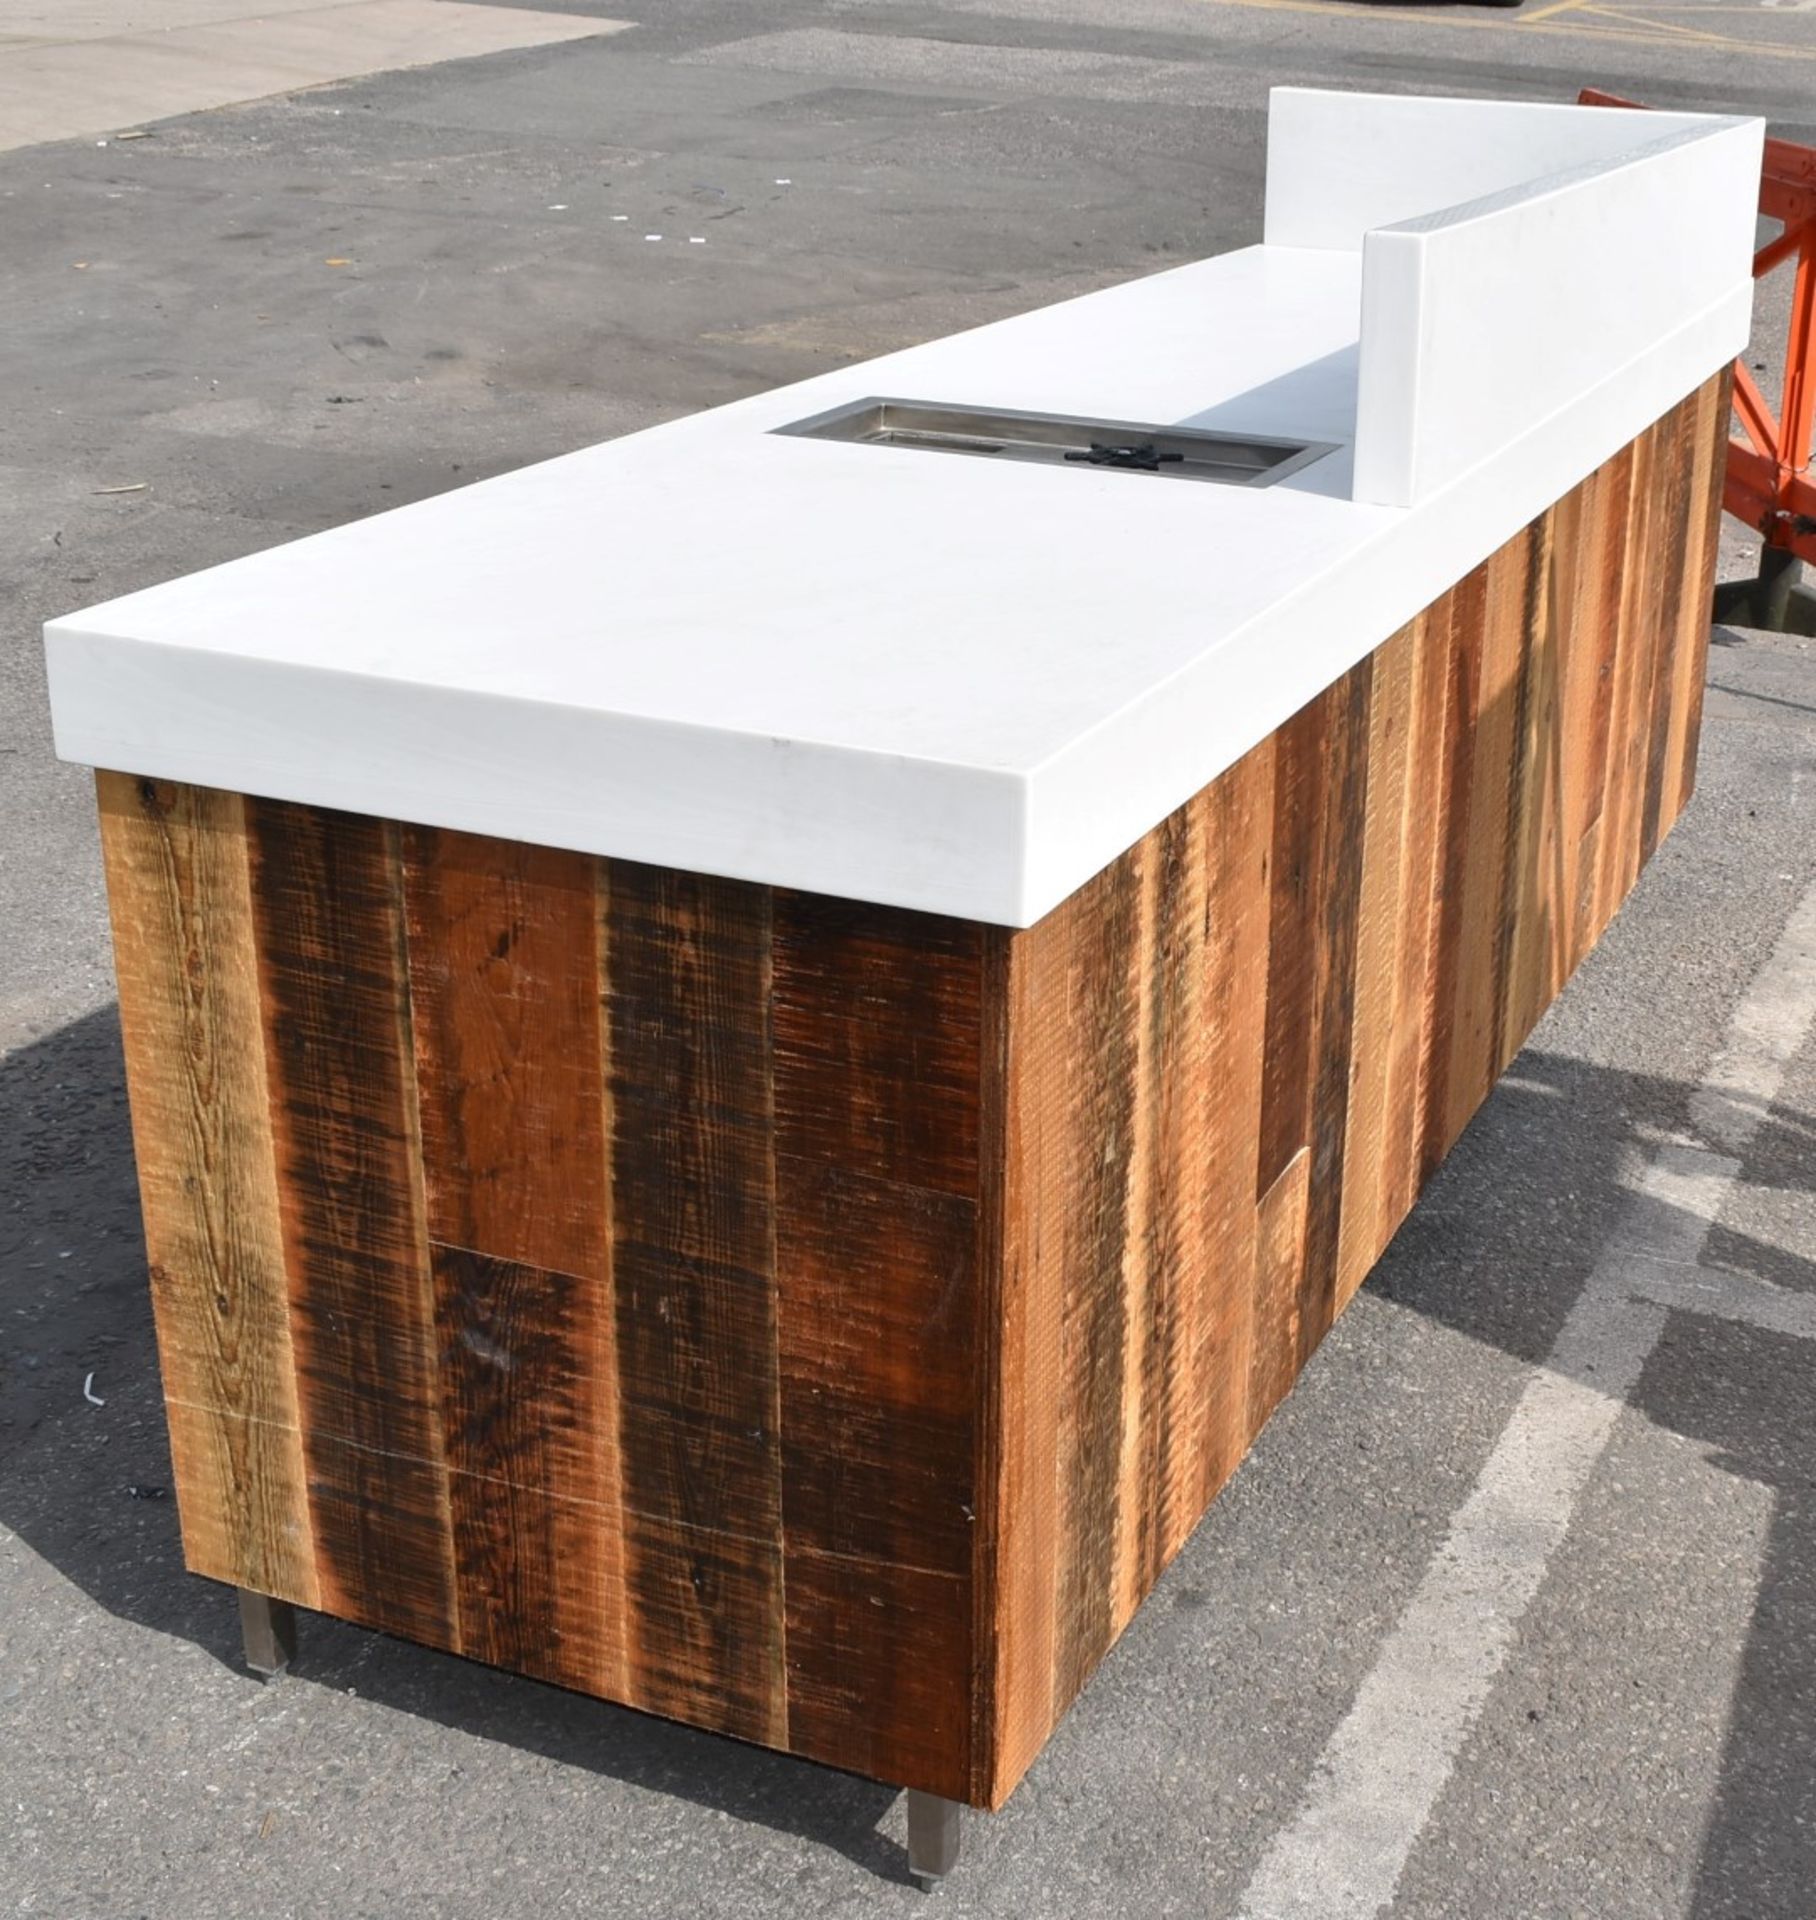 1 x Commercial Coffee Shop Preperation Counter With Natural Wooden Fascia, Hard Wearing Hygenic - Image 17 of 21